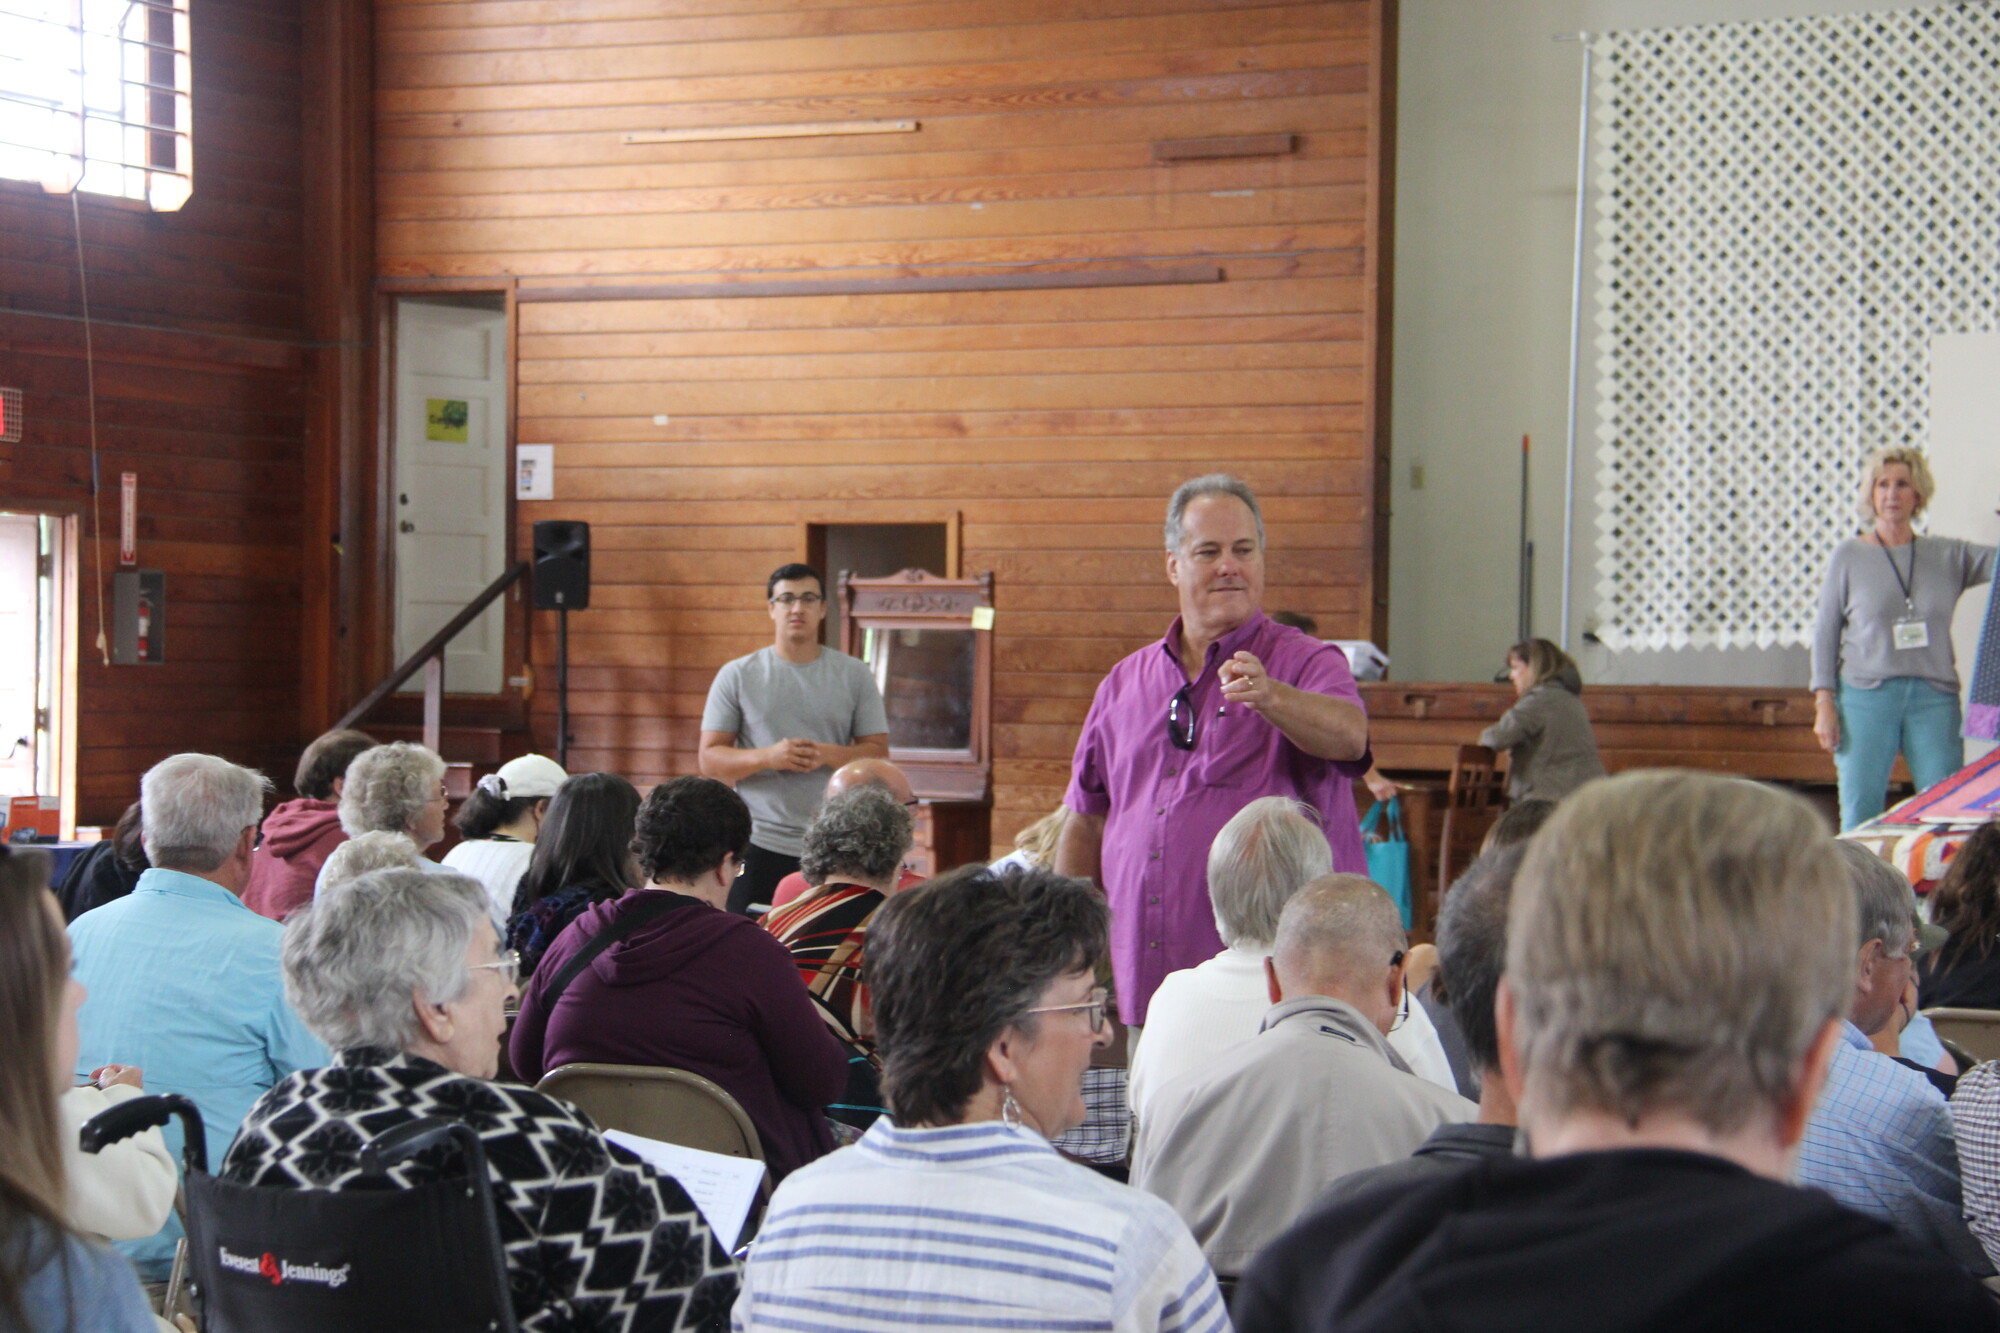 An auctioneer in a purple shirt stands in front of a crowd